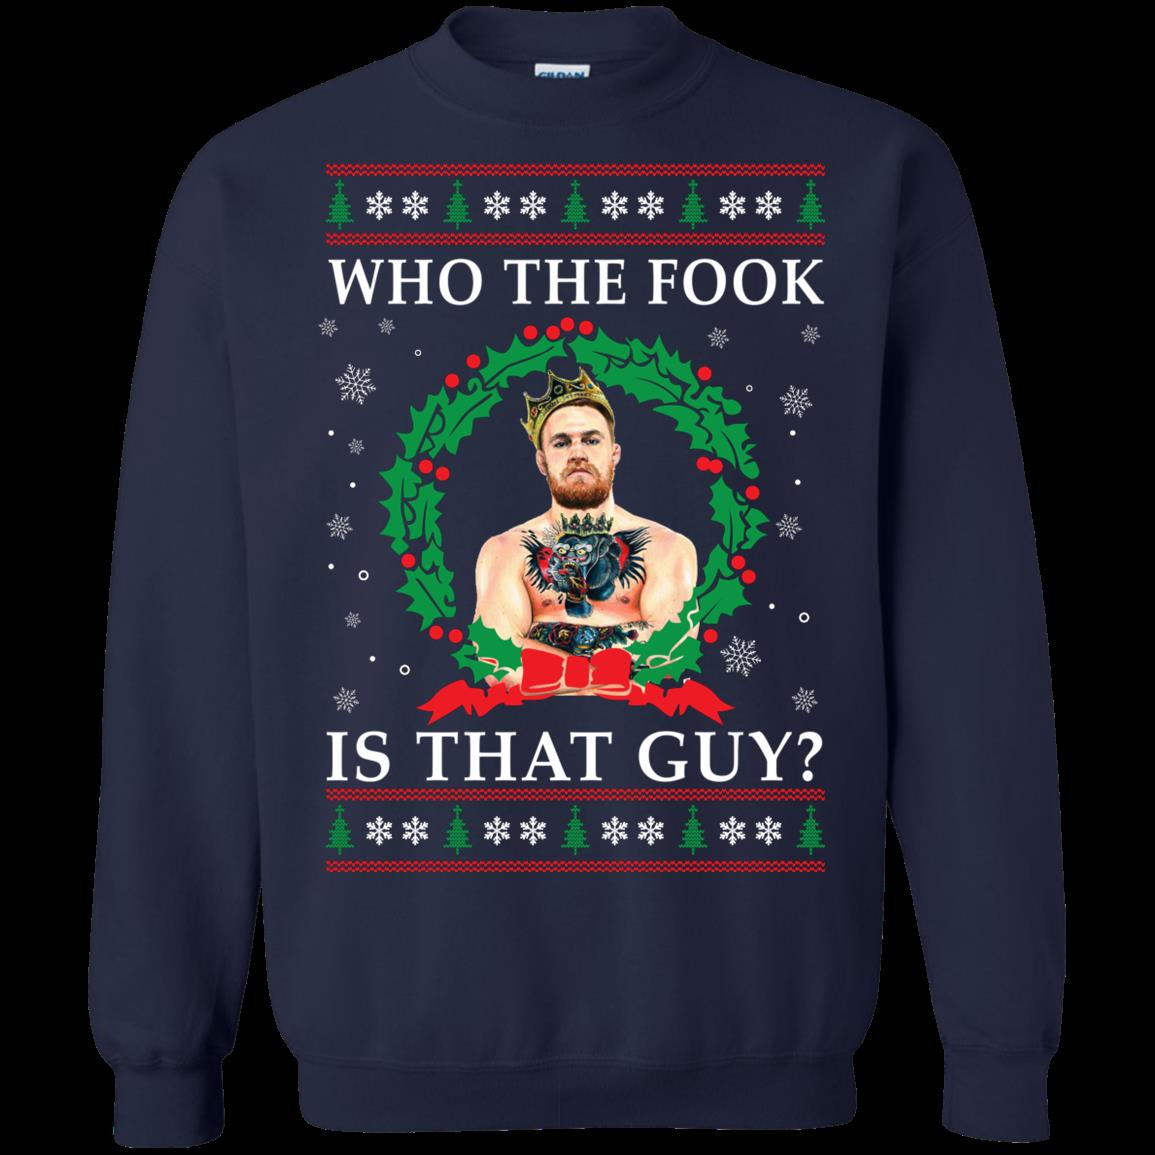 S Ufc Conor Mcgregor Ugly Christmas Sweater Shirts Who The Fook Is That Guy T Shirt Hoodies Sweatshirt 1